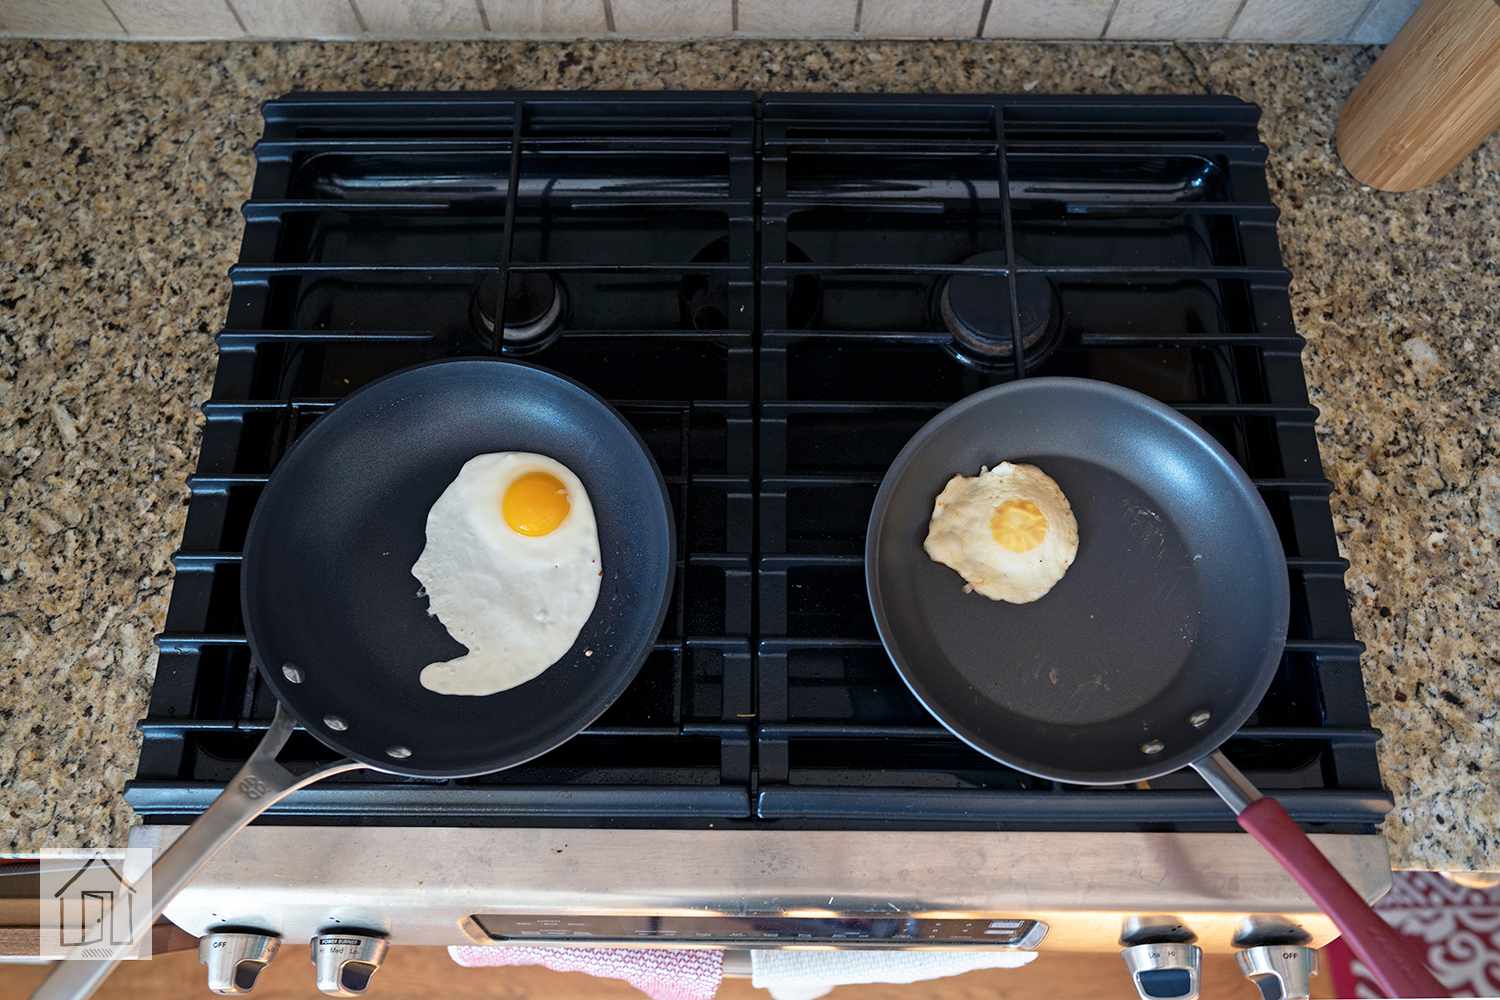 Calphalon Signature Hard Anodized Nonstick Cookware being used to prepare eggs in two different pans 